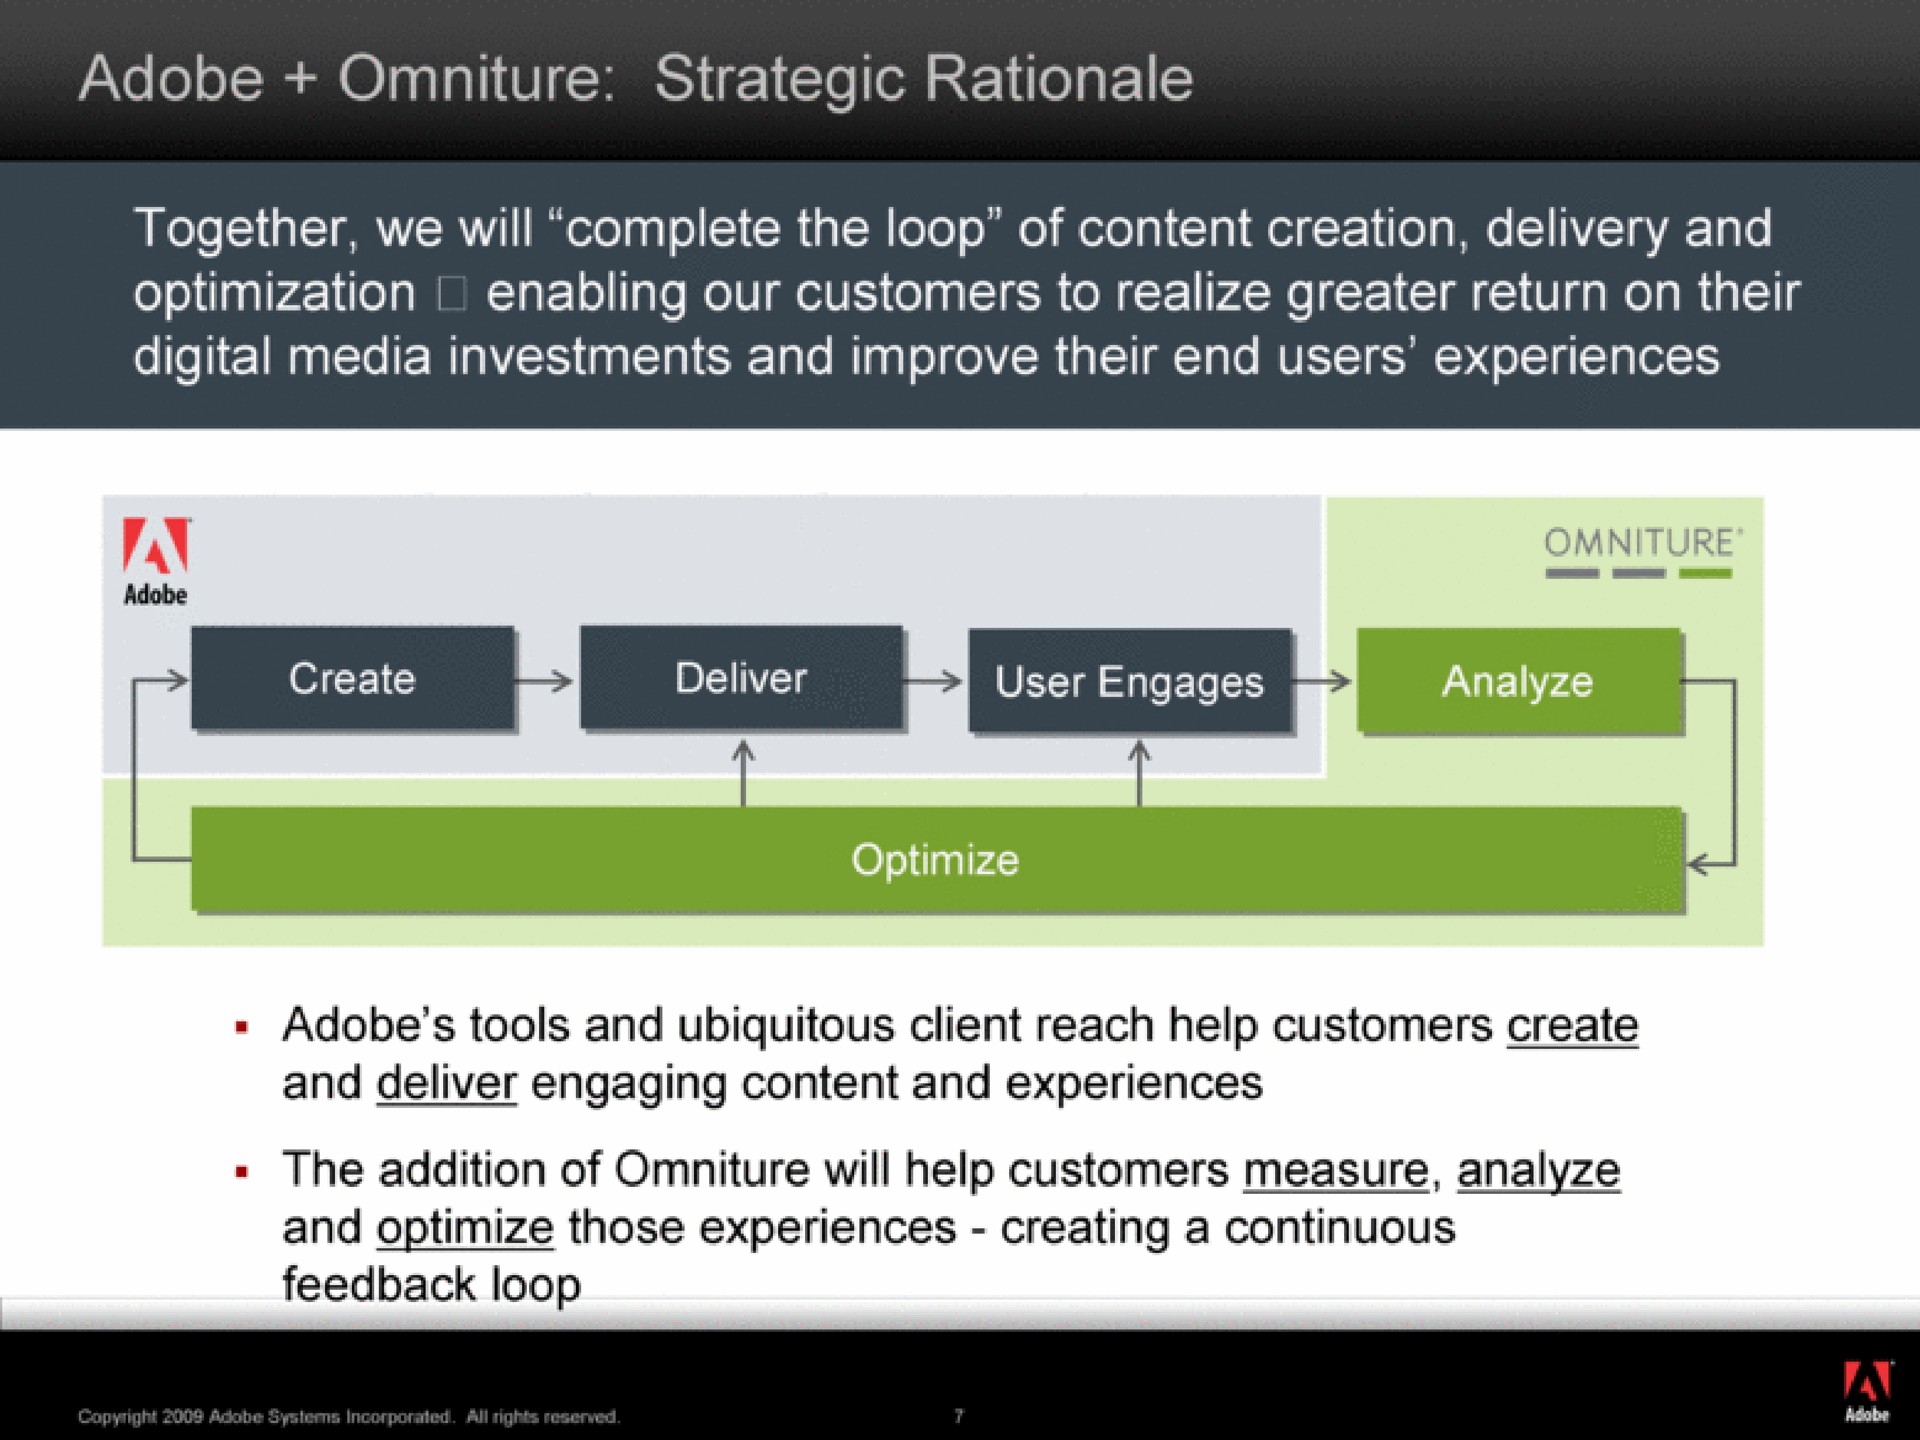 adobe strategic rationale together we will complete the loop of content creation delivery and optimization digital media investments and improve their end users experiences enabling our customers to realize greater return on their an the addition of will help customers measure analyze | Adobe